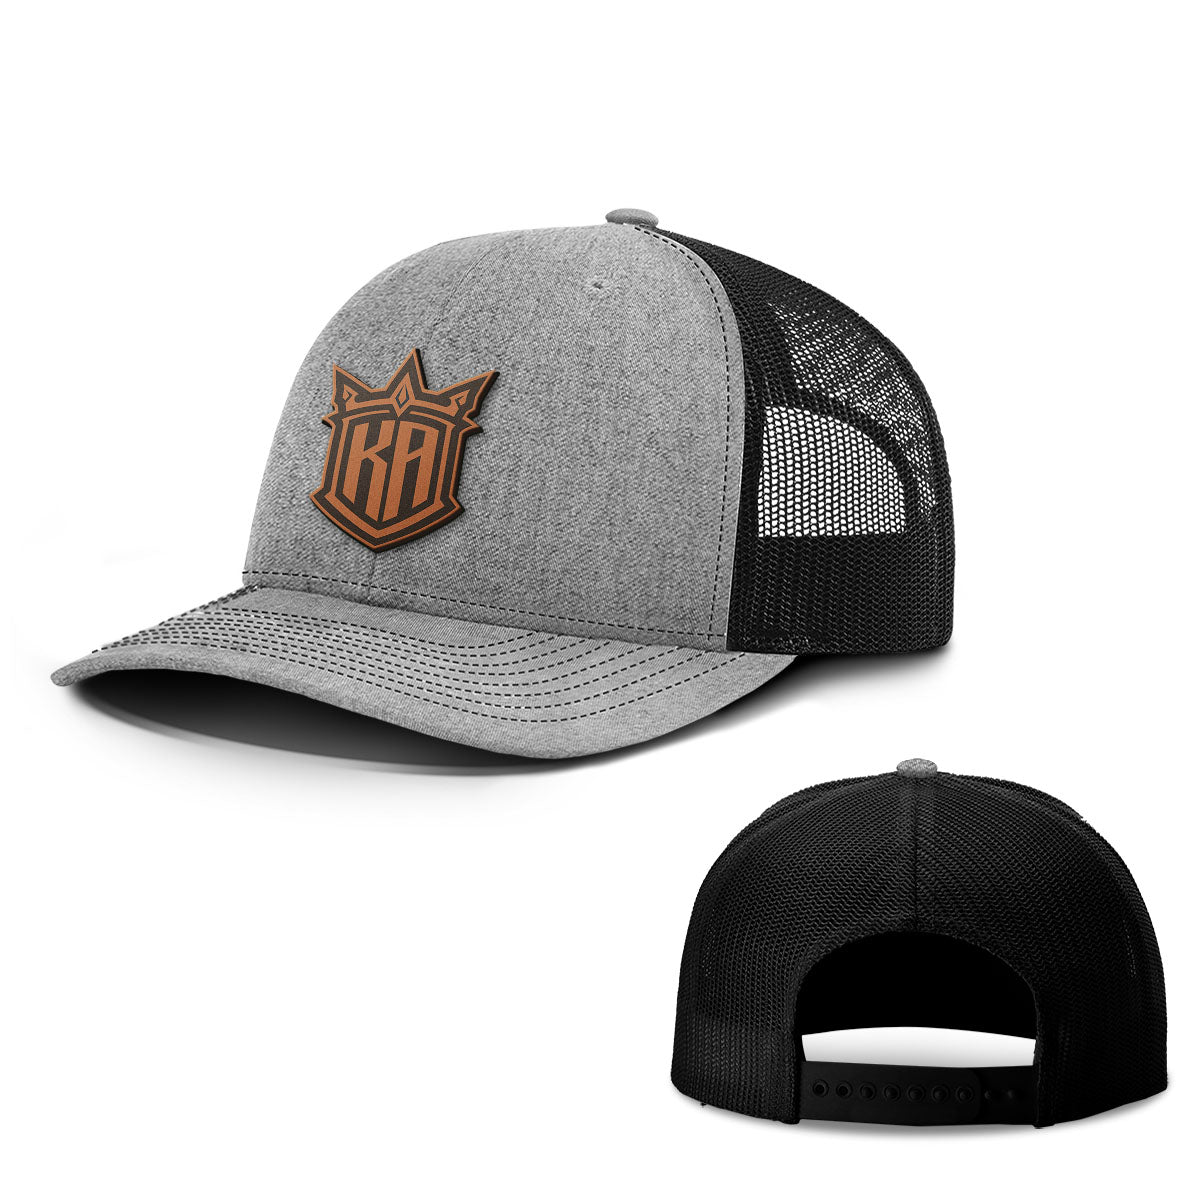 King Achilles (KA) Leather Patch Hats